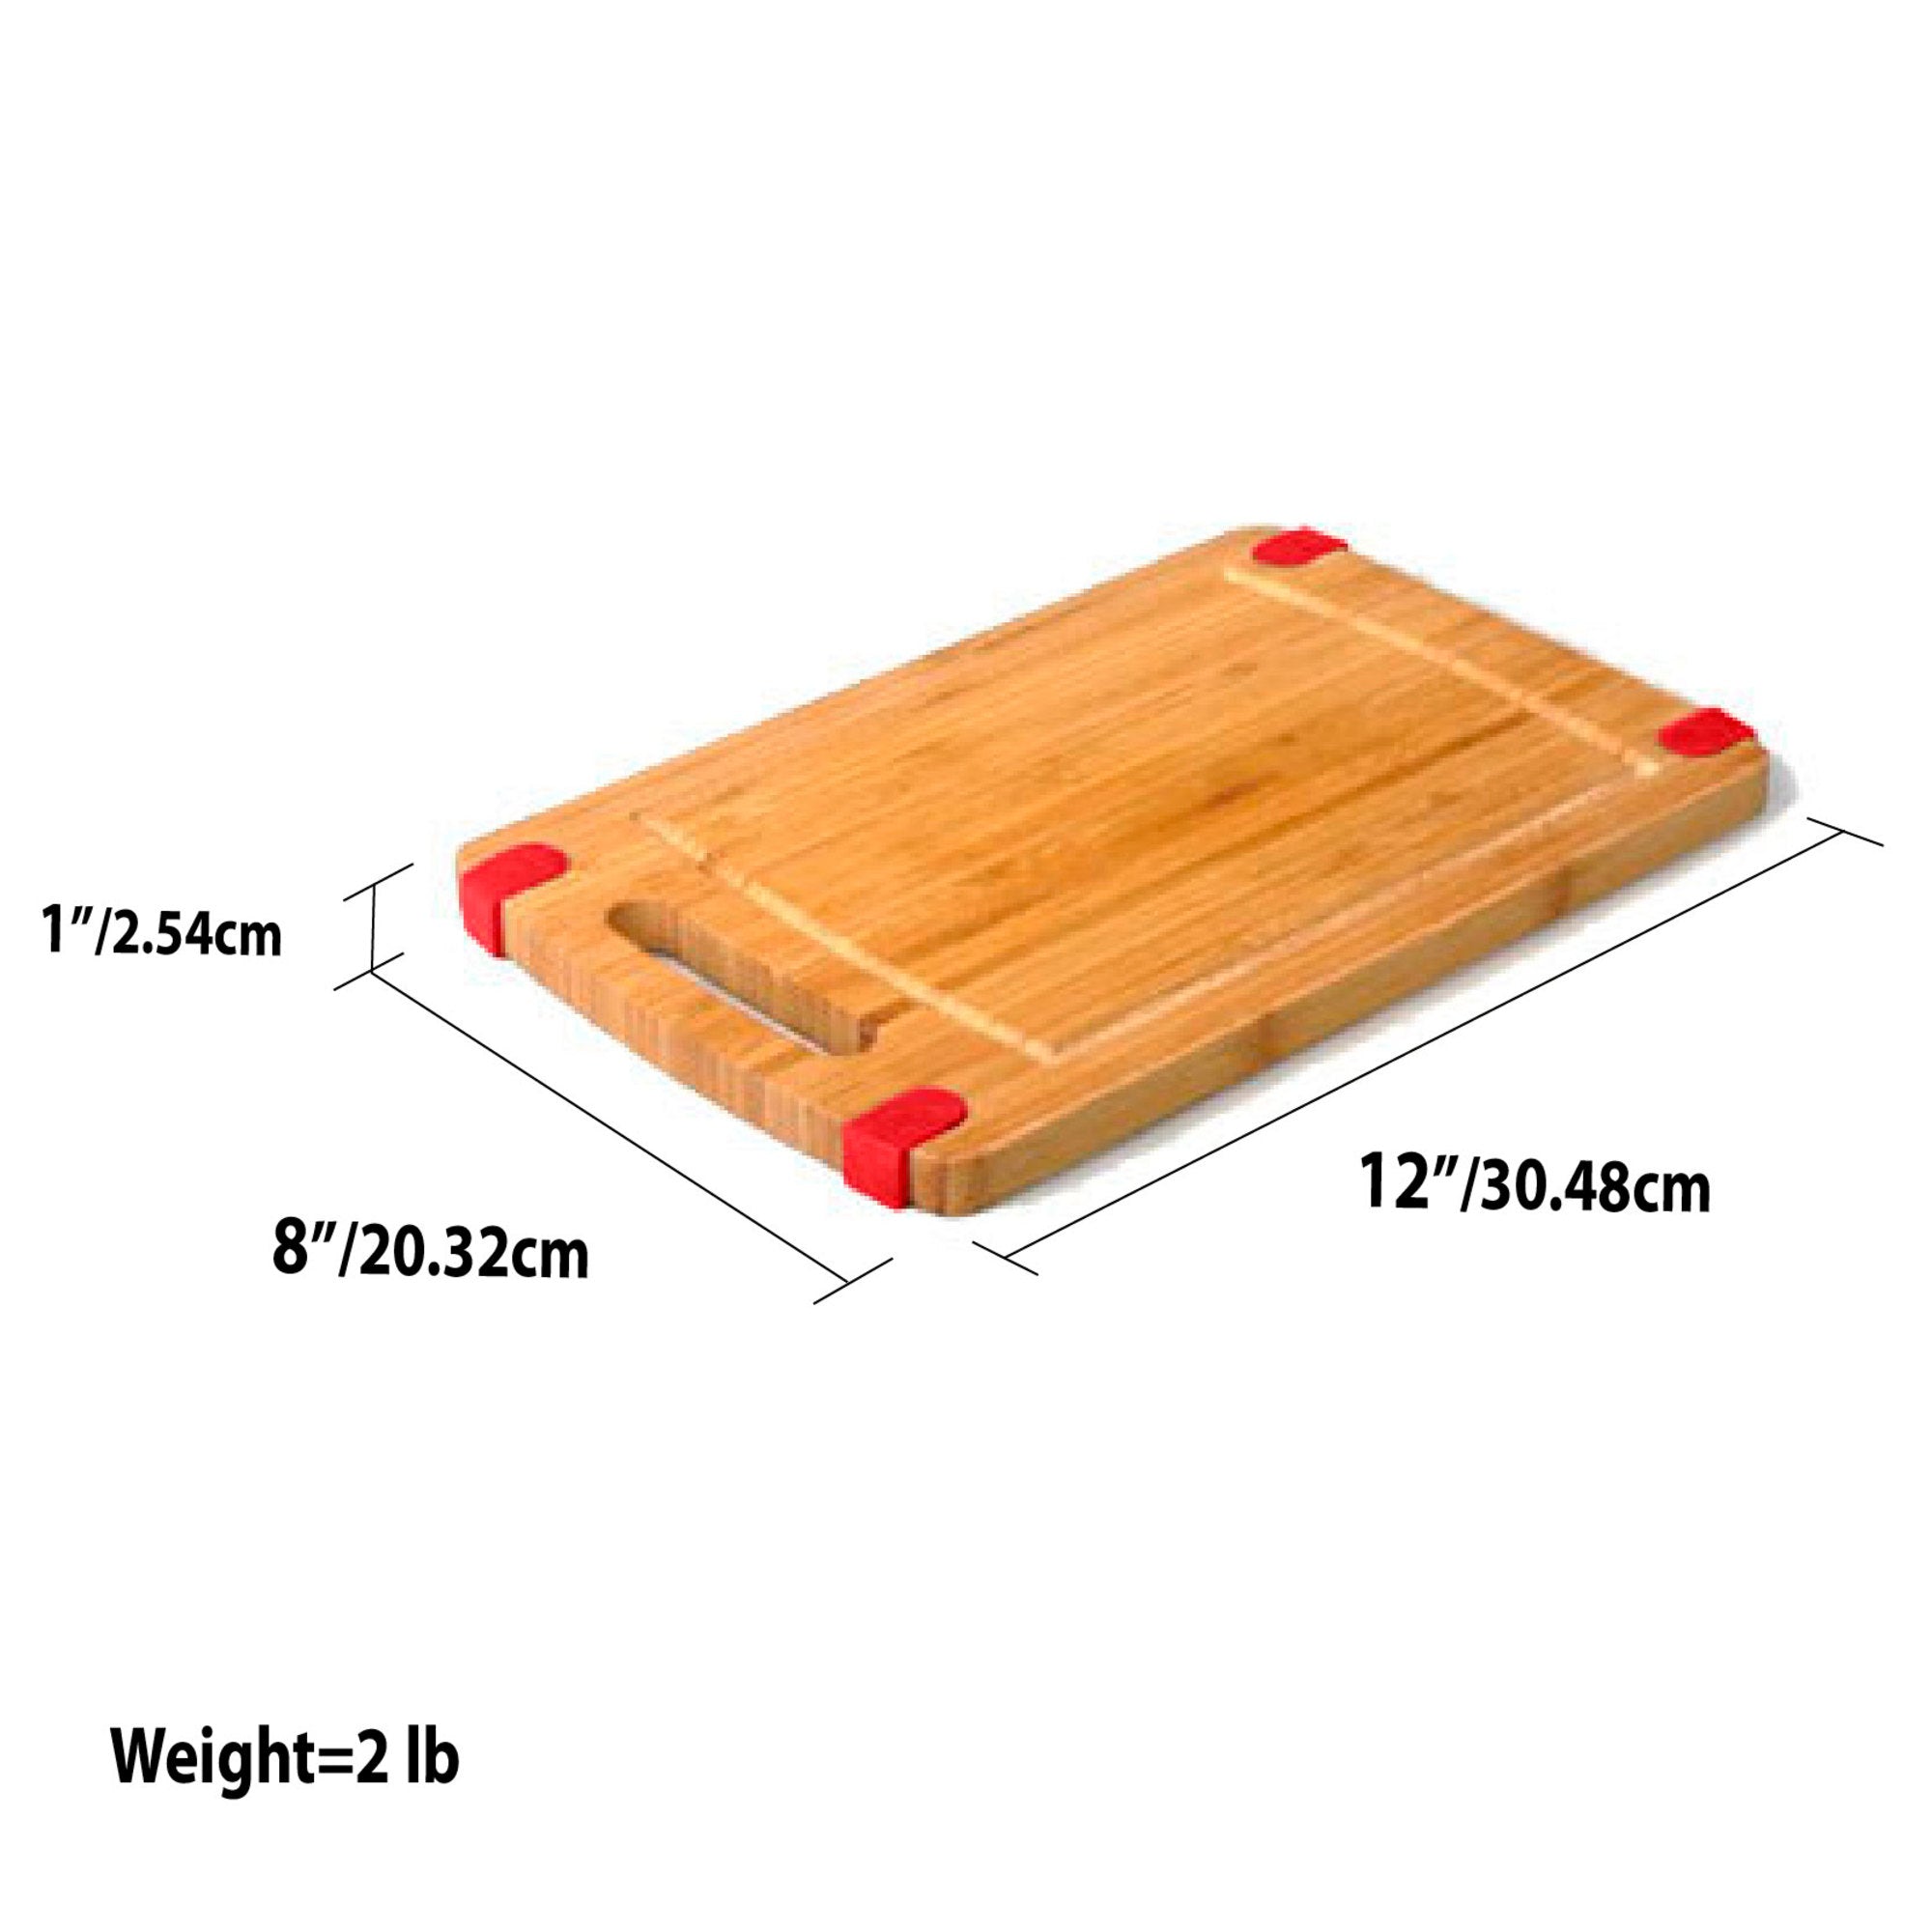 Home Basics 12" x 8" Bamboo Cutting Board - Assorted Colors